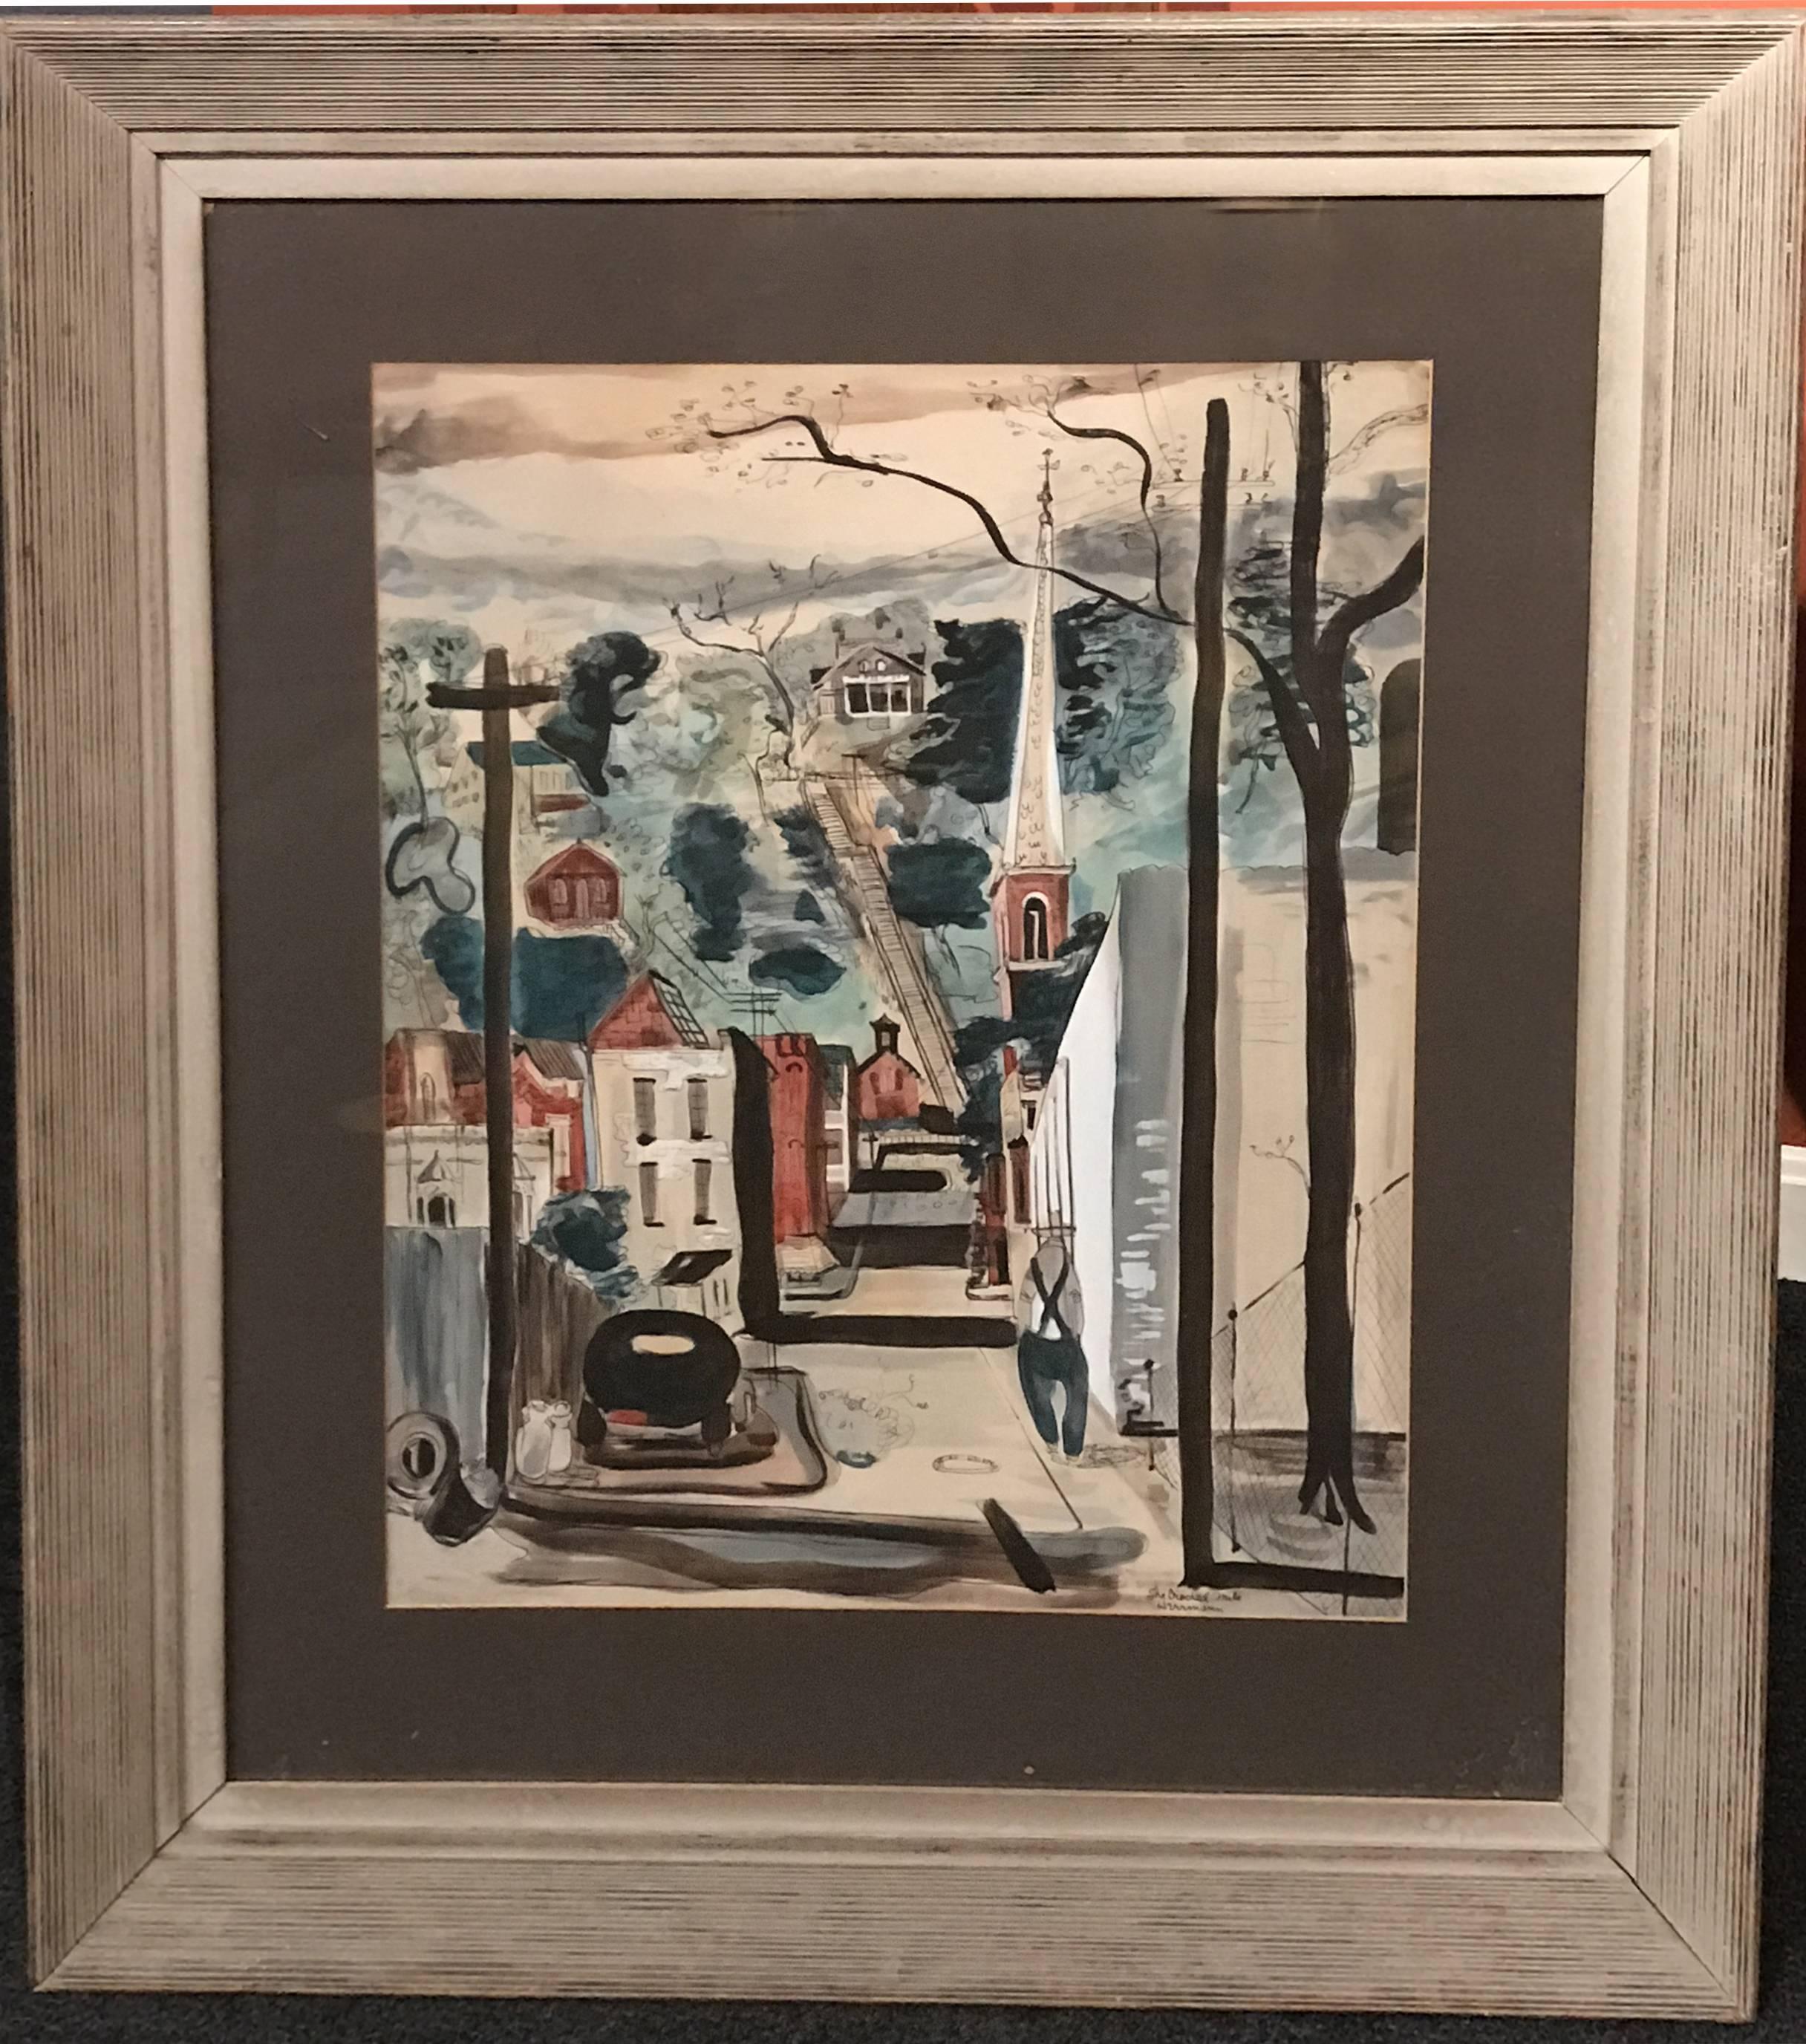 This exceptional cityscape print in Gallenas, Illinois was painted by American artist Edward Herrmann (1914-2012). Herrmann was born in Ft. Wayne, Indiana and was educated as a mechanical engineer for three years at Purdue, Indiana and Penn State